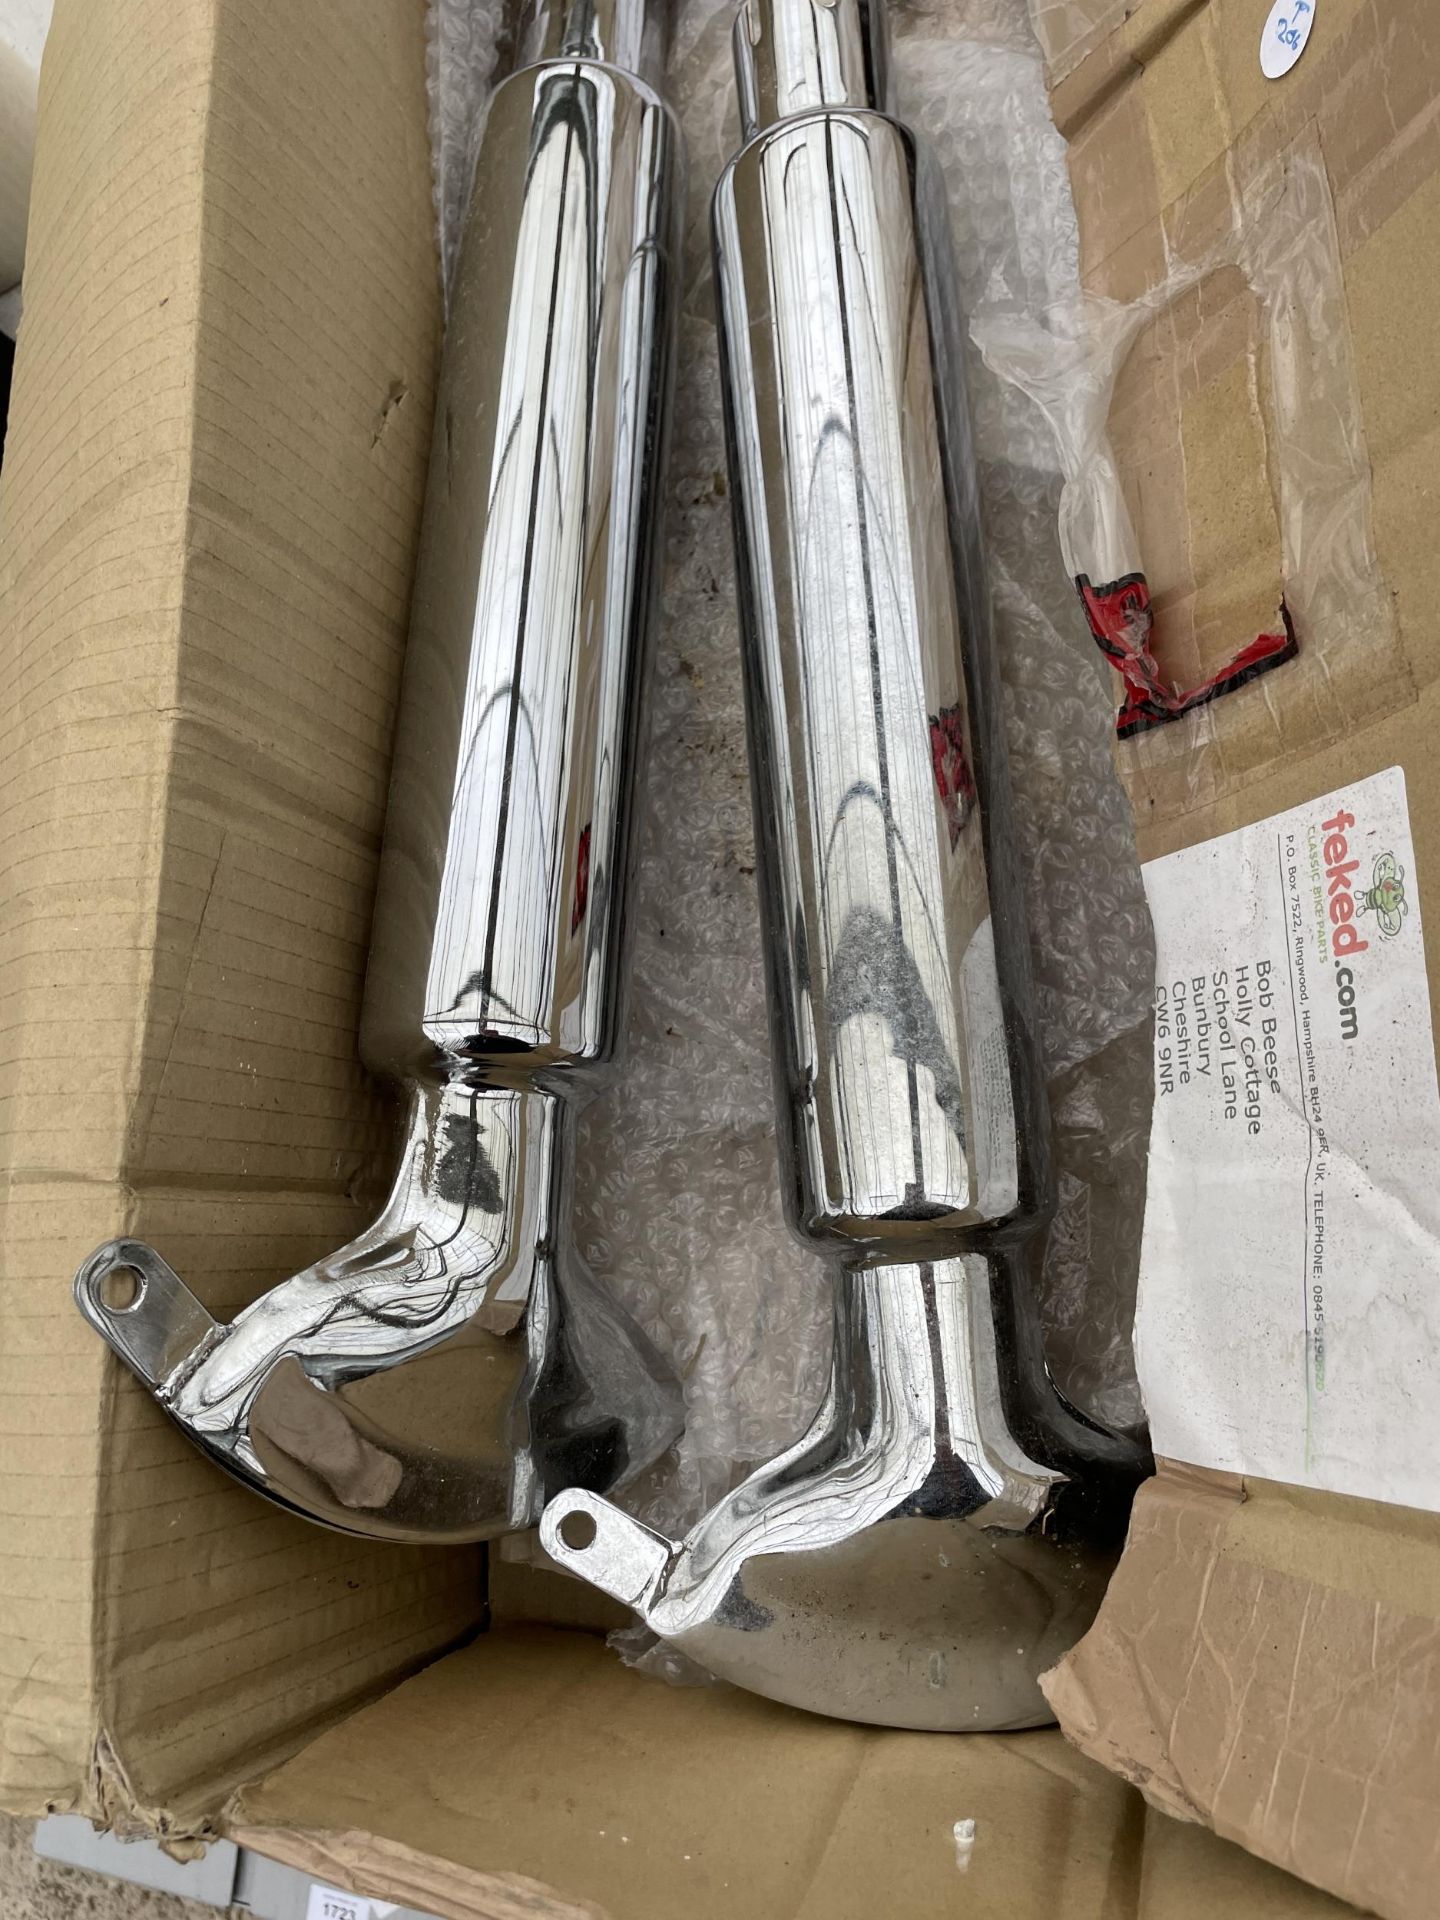 A SET OF MOTORBIKE EXHUAST SILENCERS BELIEVED TO BE FOR AN AJS - Bild 2 aus 3